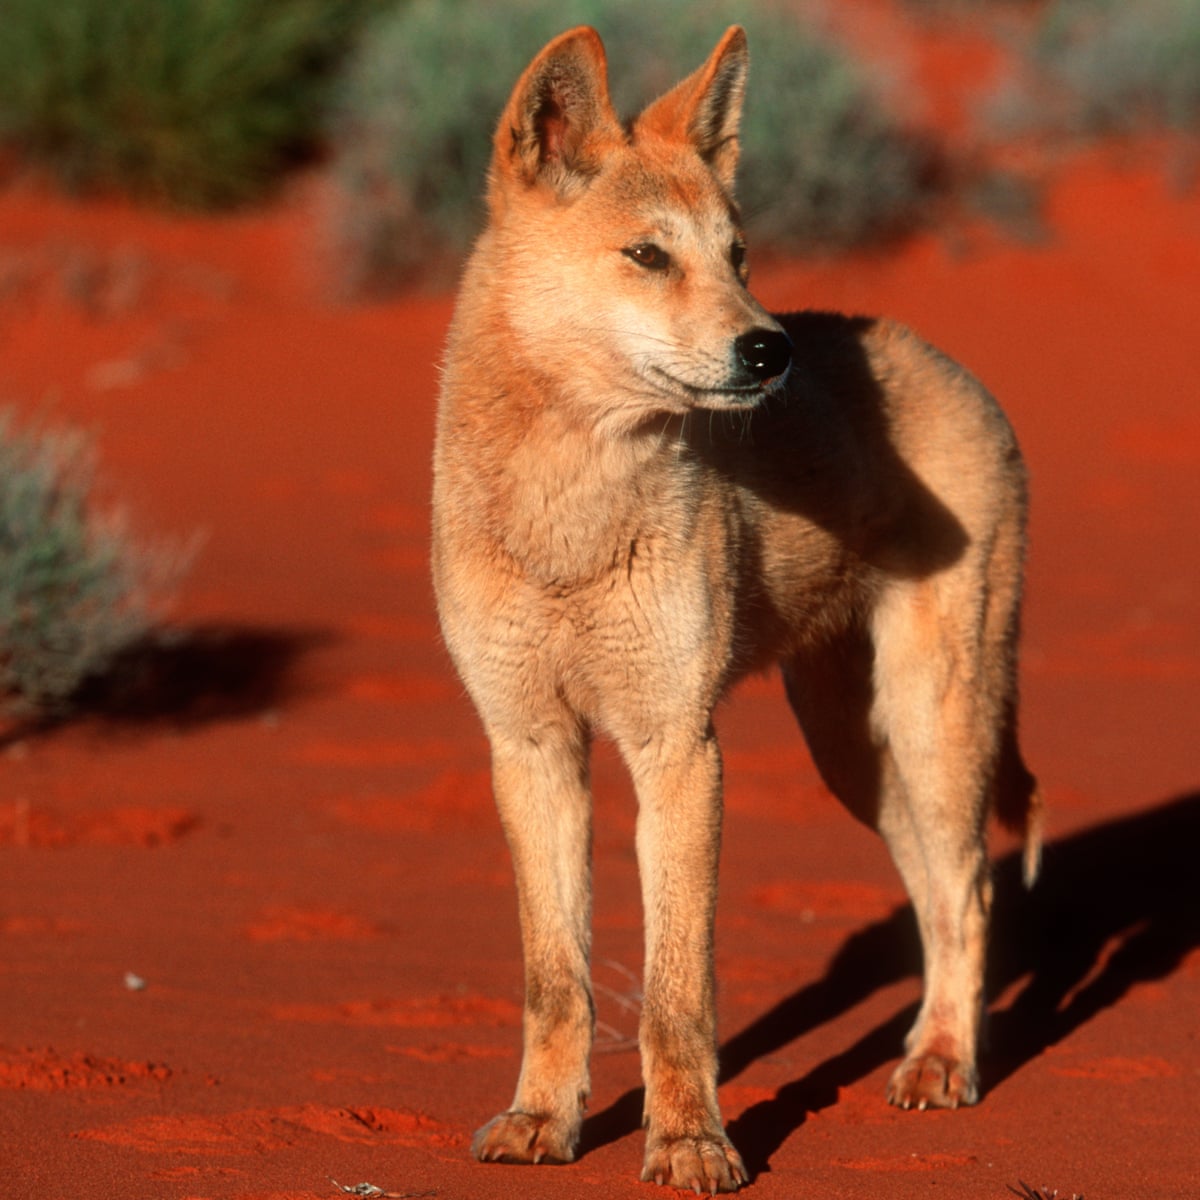 Brave' mother who fought off dingo that attacked son praised by WA premier  | Western Australia | The Guardian